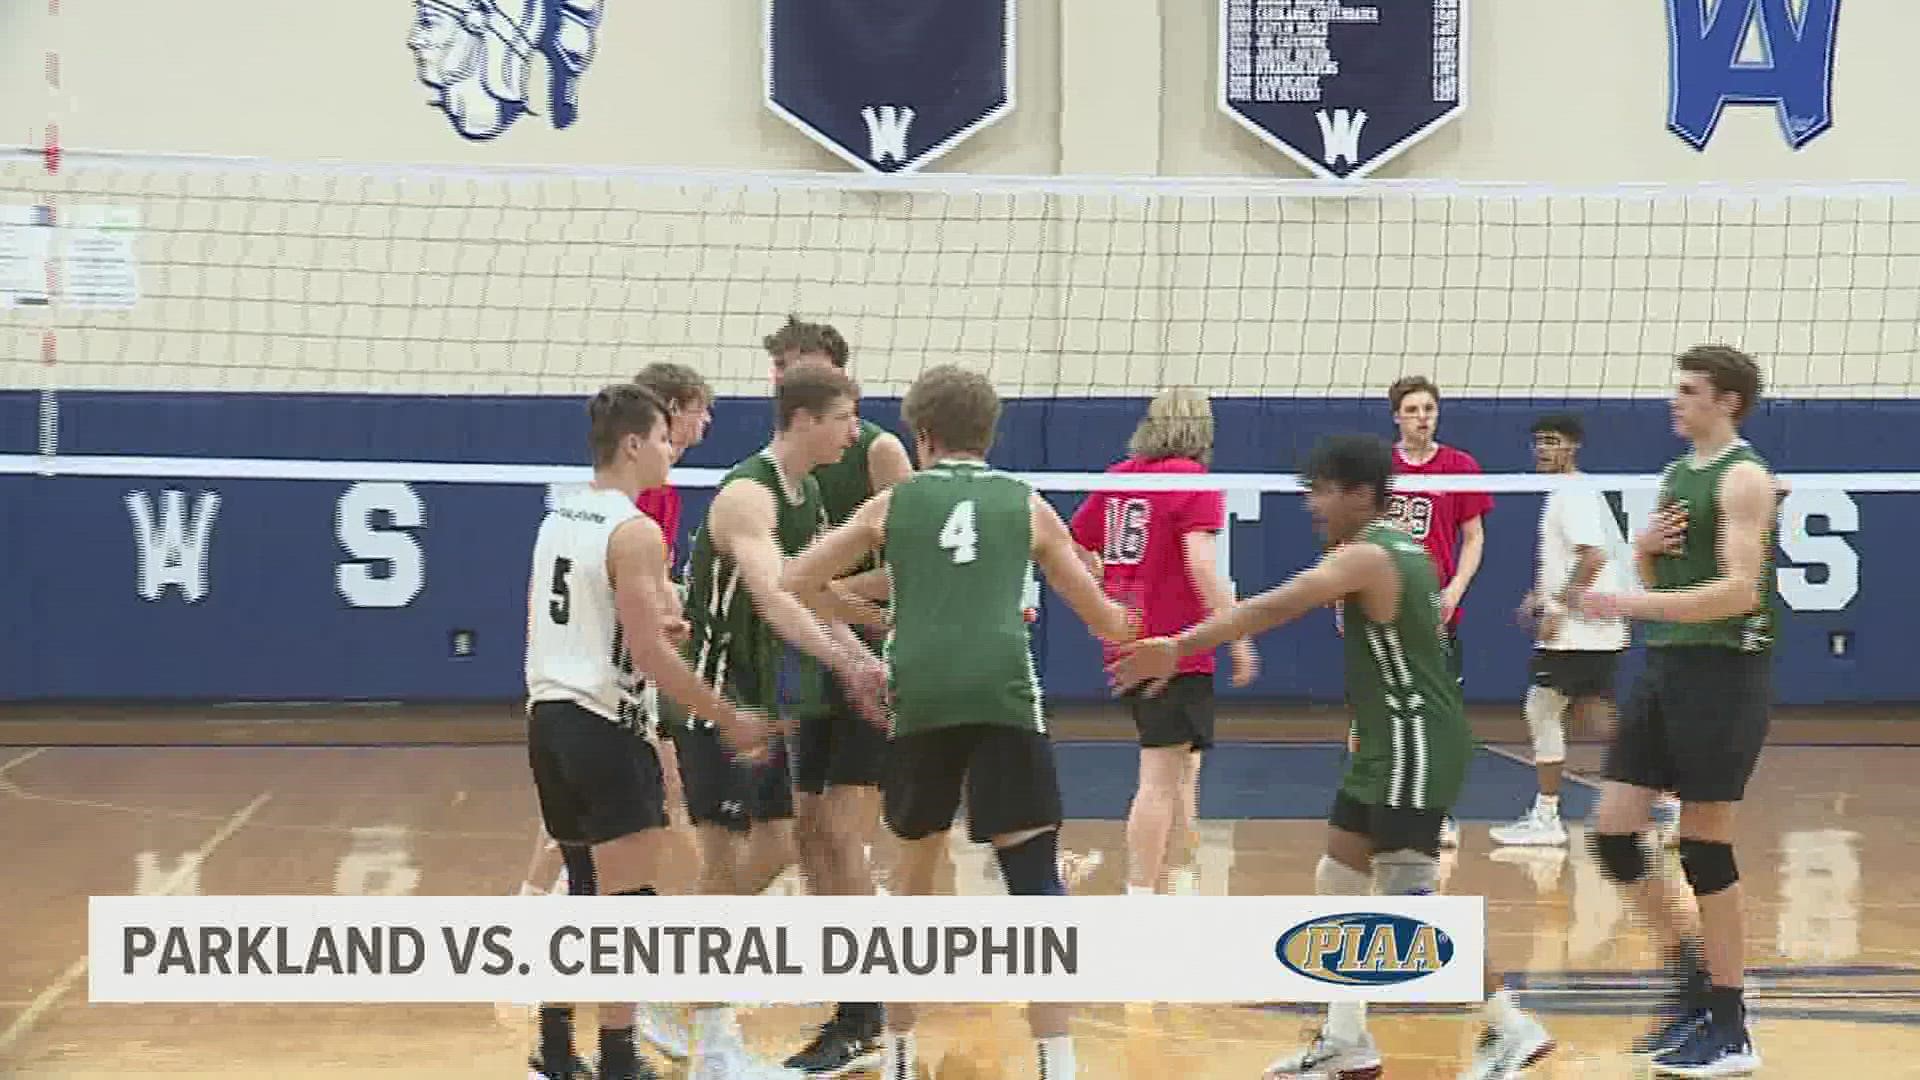 Hempfield and Cumberland Valley just miss moving on; Central Dauphin finds their offense in the thrid set to advance